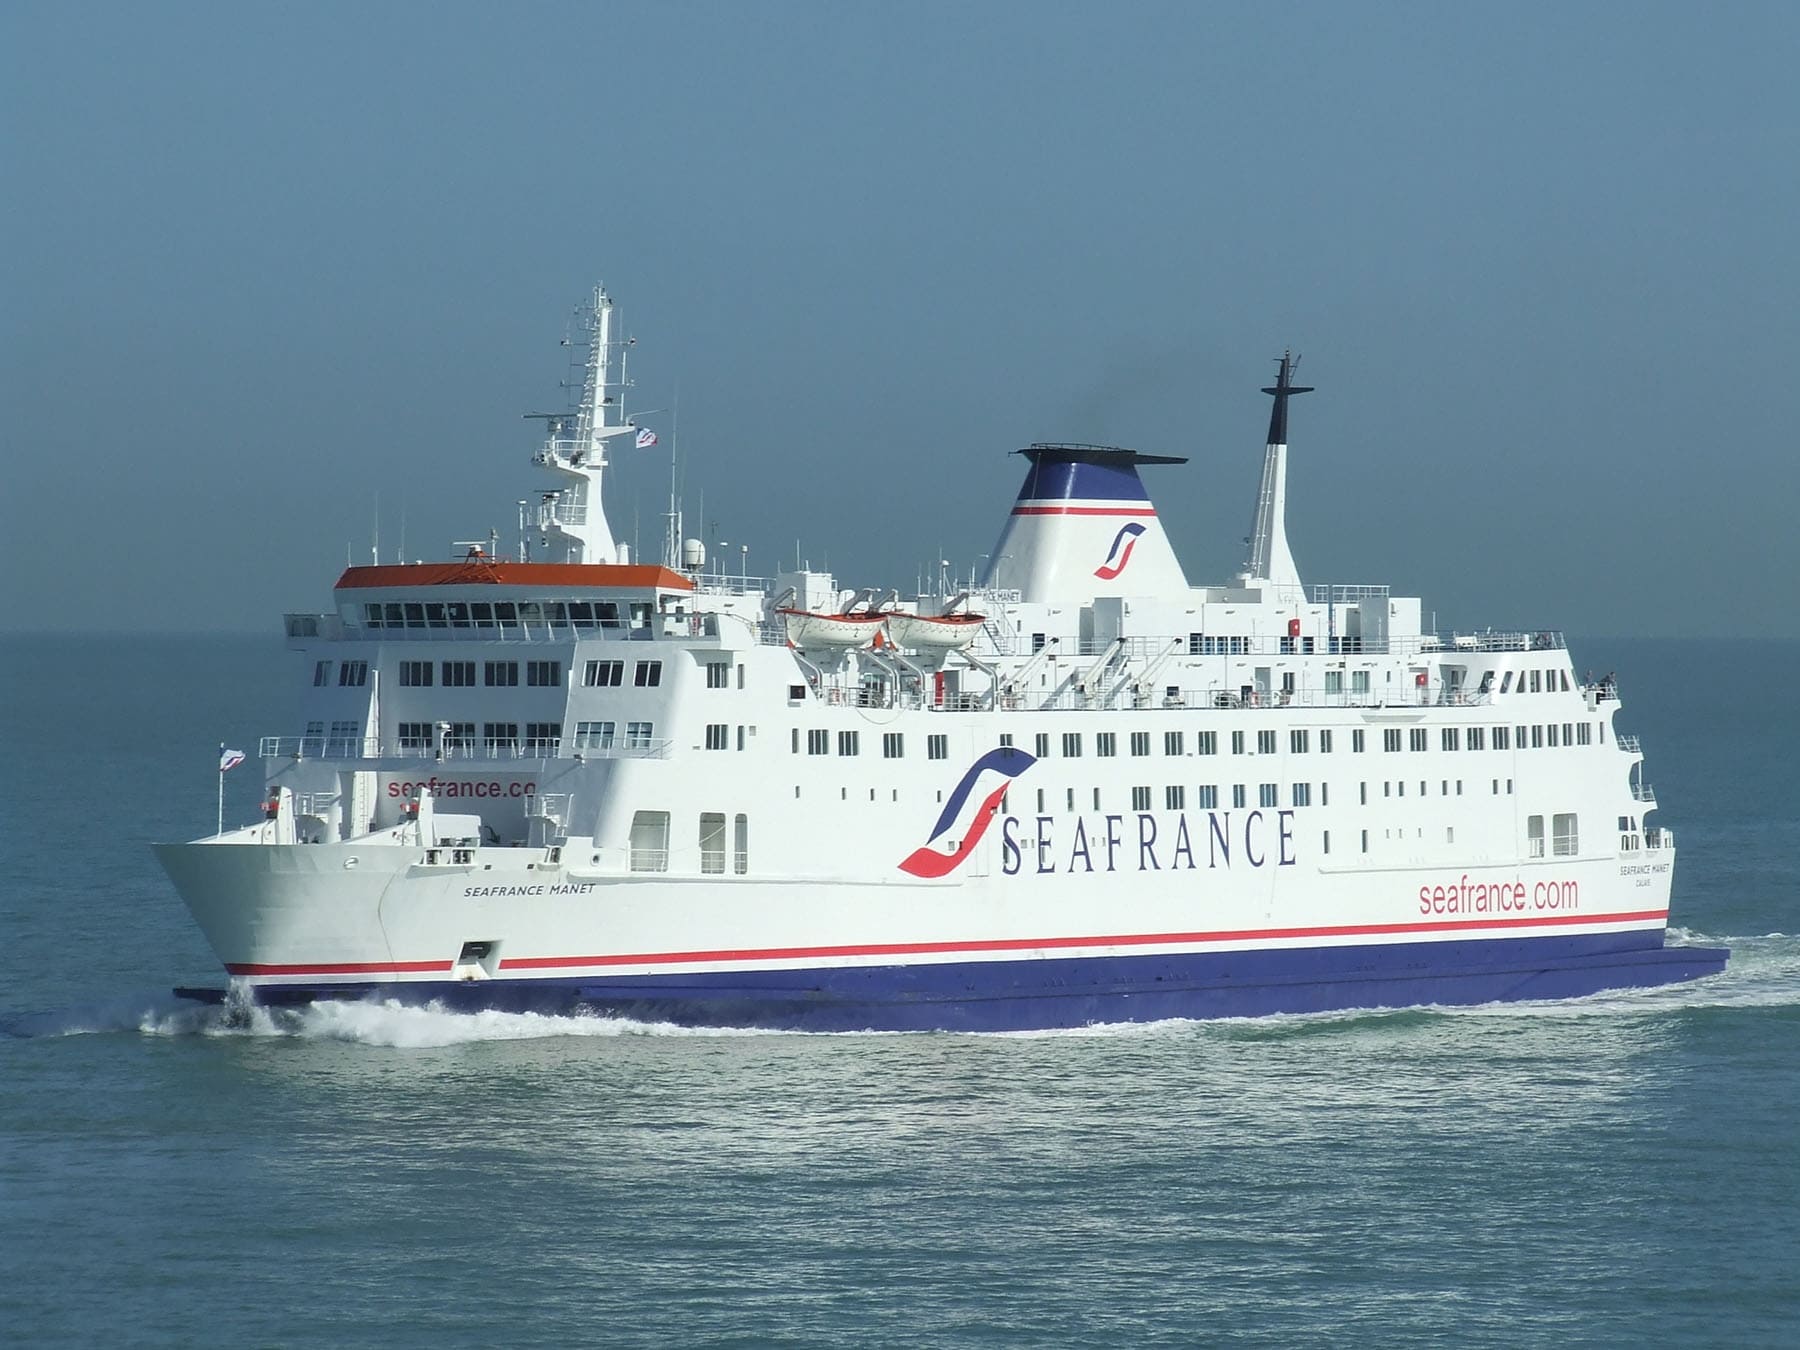 SEAFRANCE MANET seen arriving at Calais in March 2007. Copyright © George Holland.